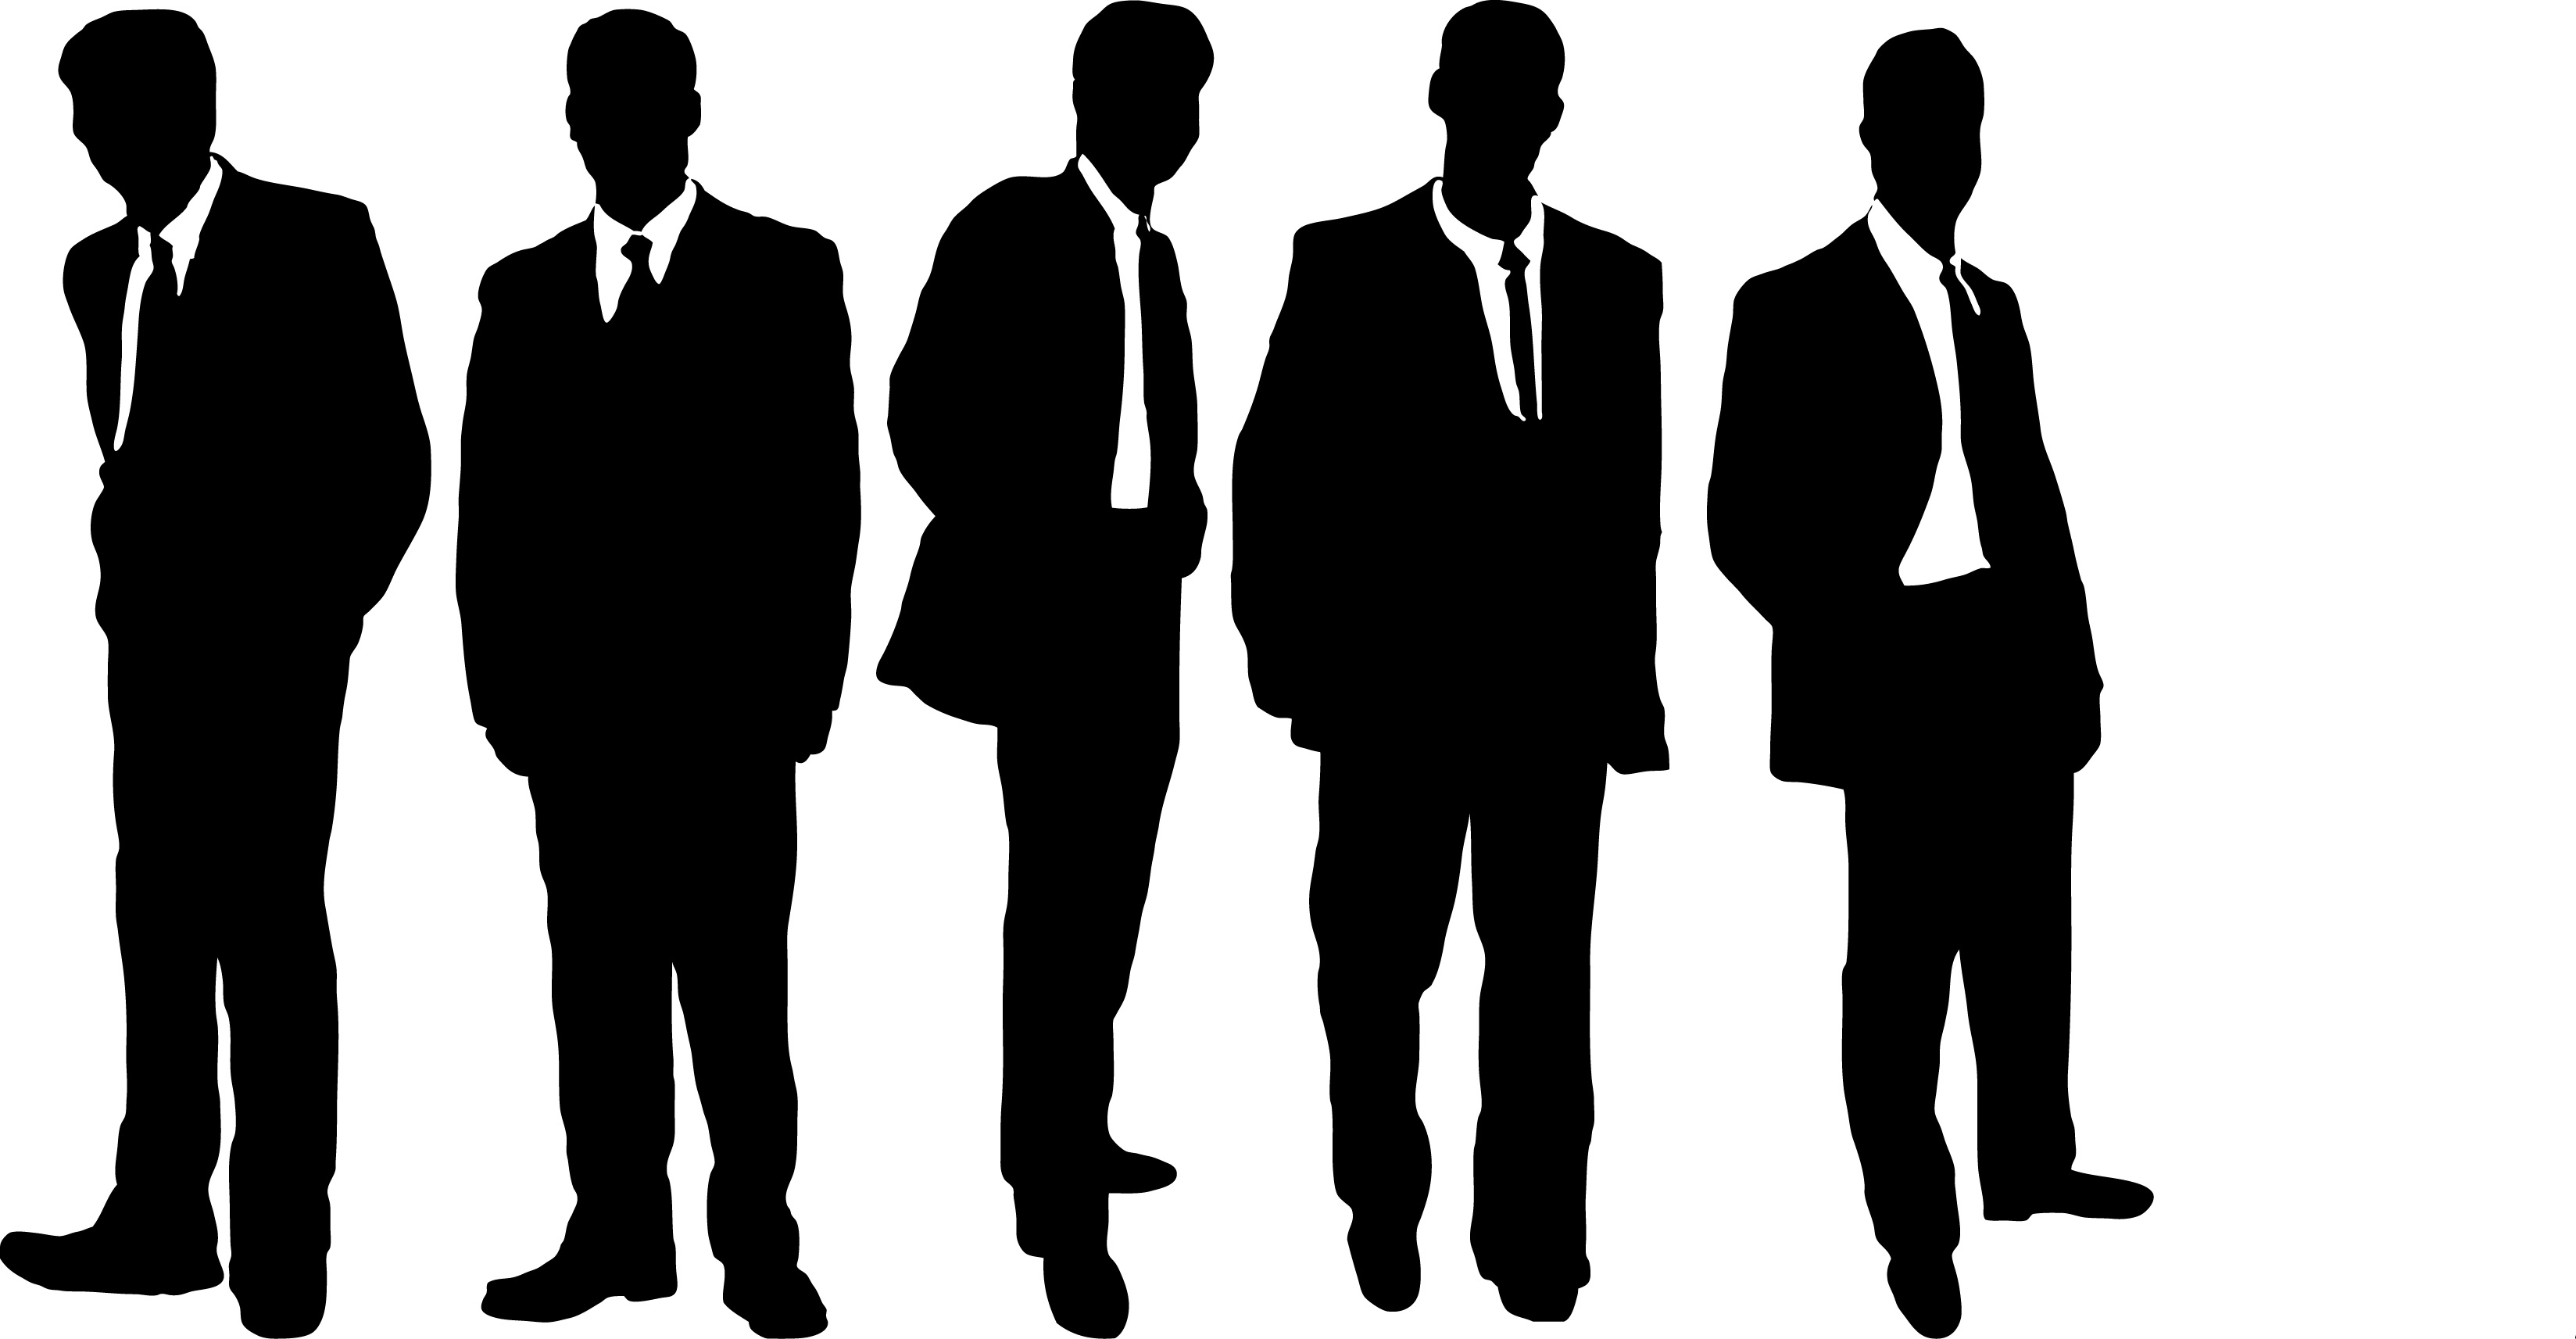 Group Of People Image | Free Download Clip Art | Free Clip Art ...